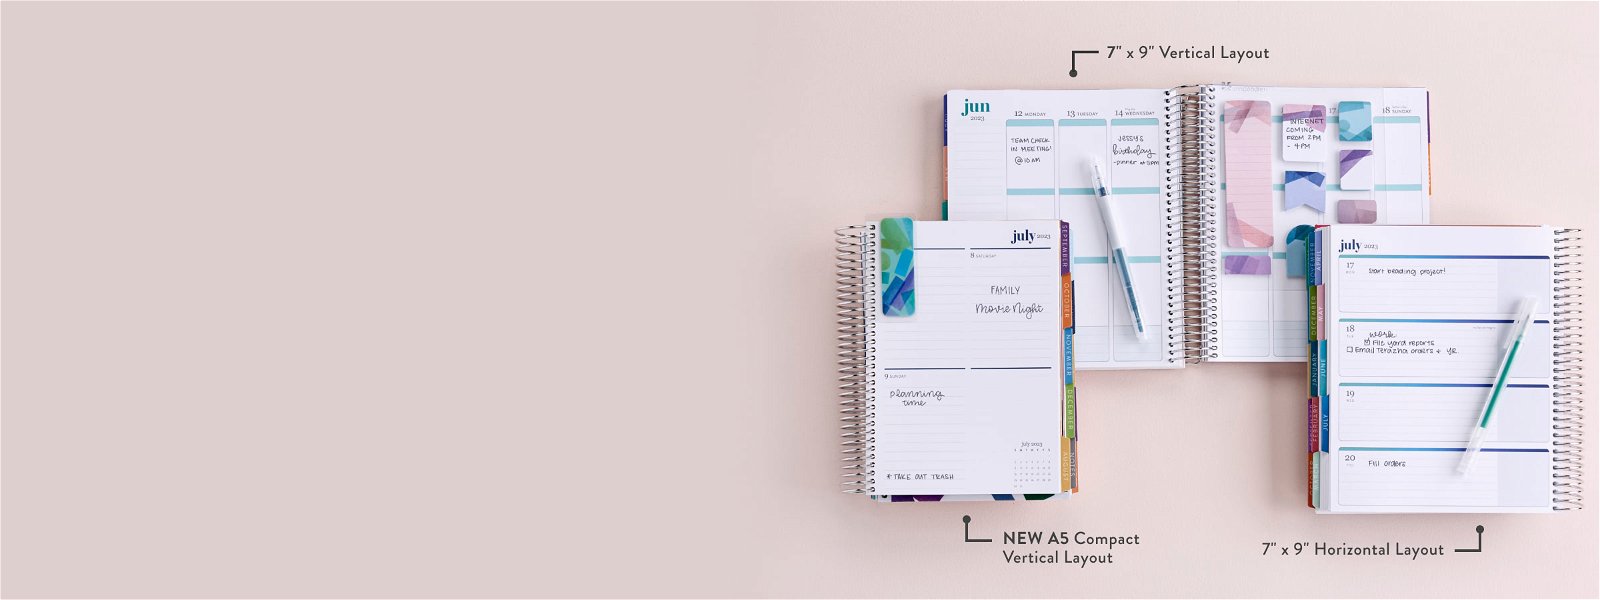 Overhead view of three Coiled Weekly Lifeplanners featuring different layout options including our 7″ x 9″ Vertical Layout, New A5 compact Vertical Layout, and 7″ x 9″ Horizontal Layout